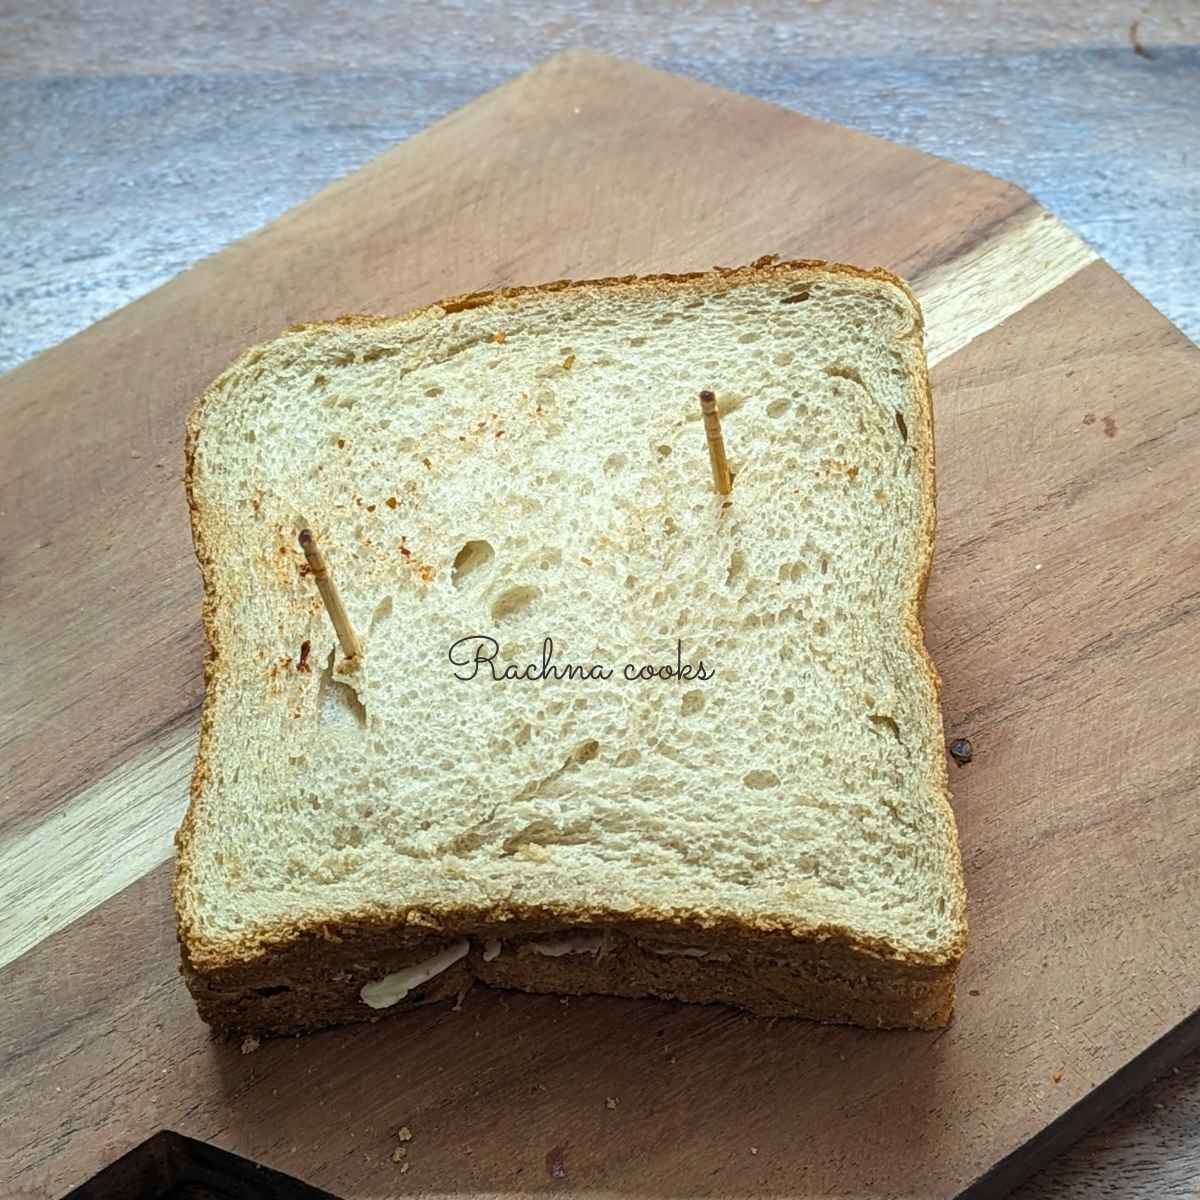 Sandwich secured with 2 toothpicks